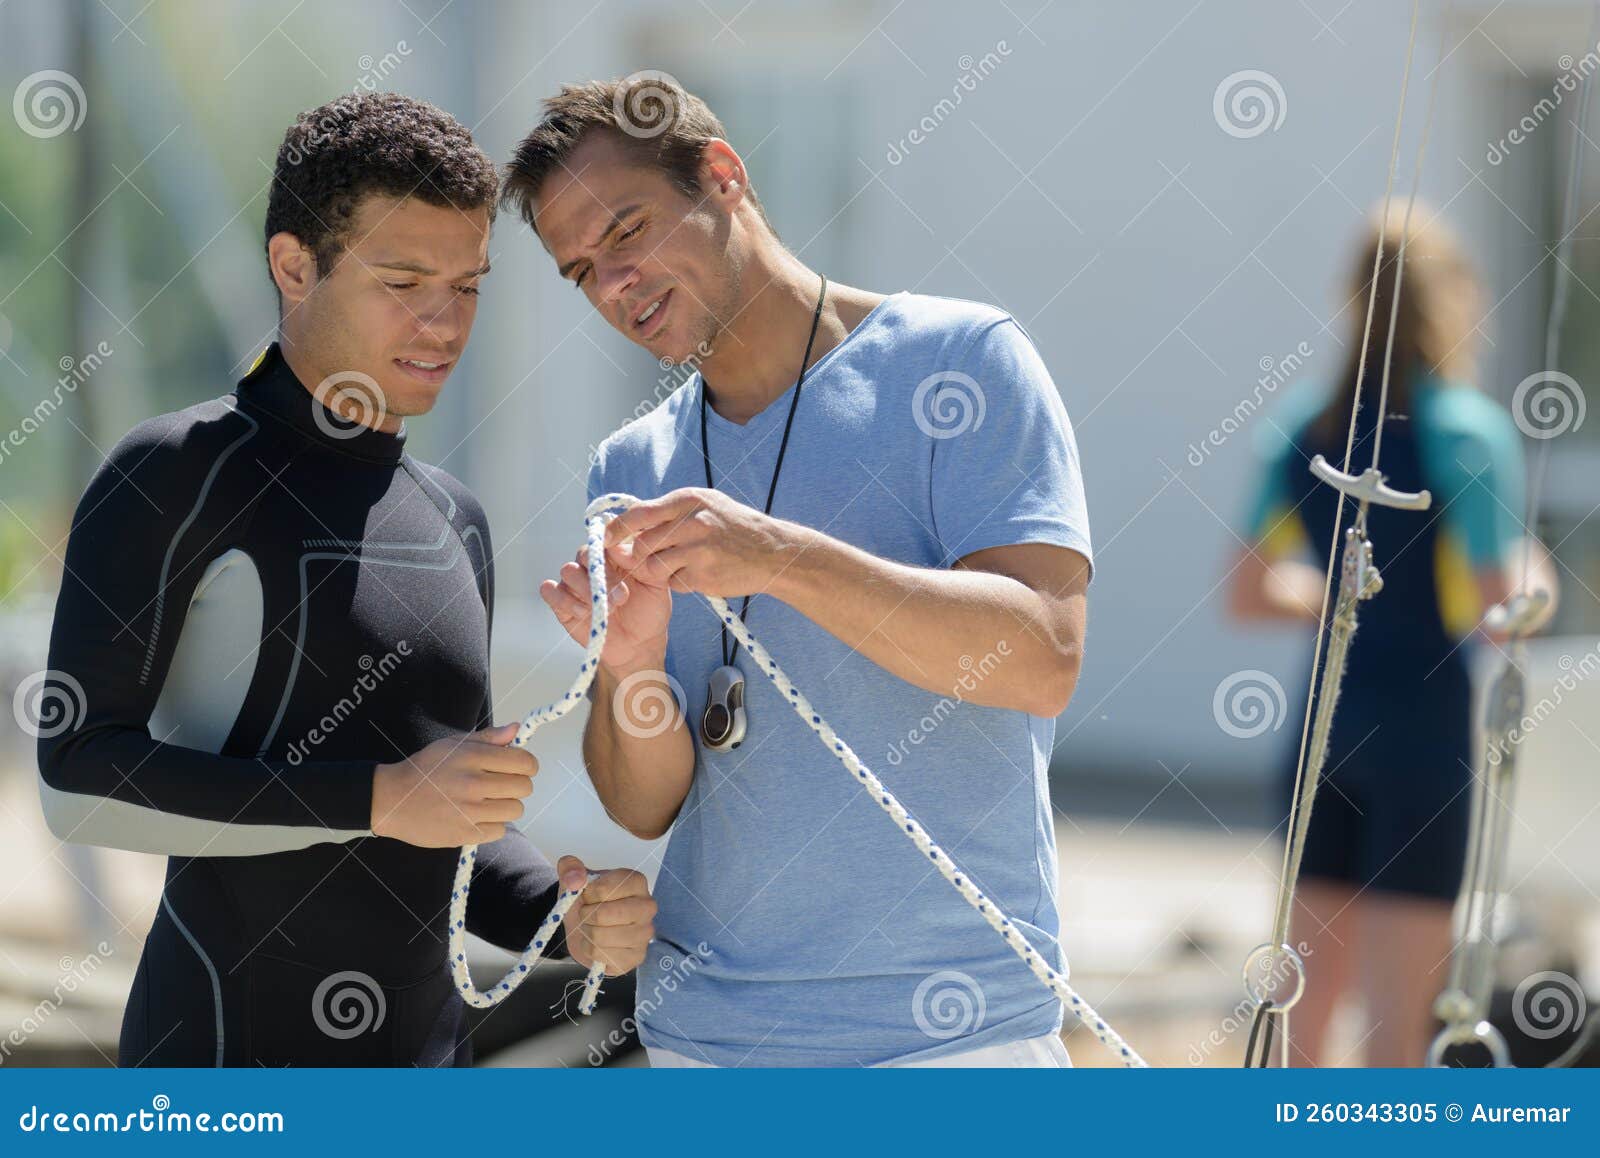 young man in wetsuit learning how to knot rope